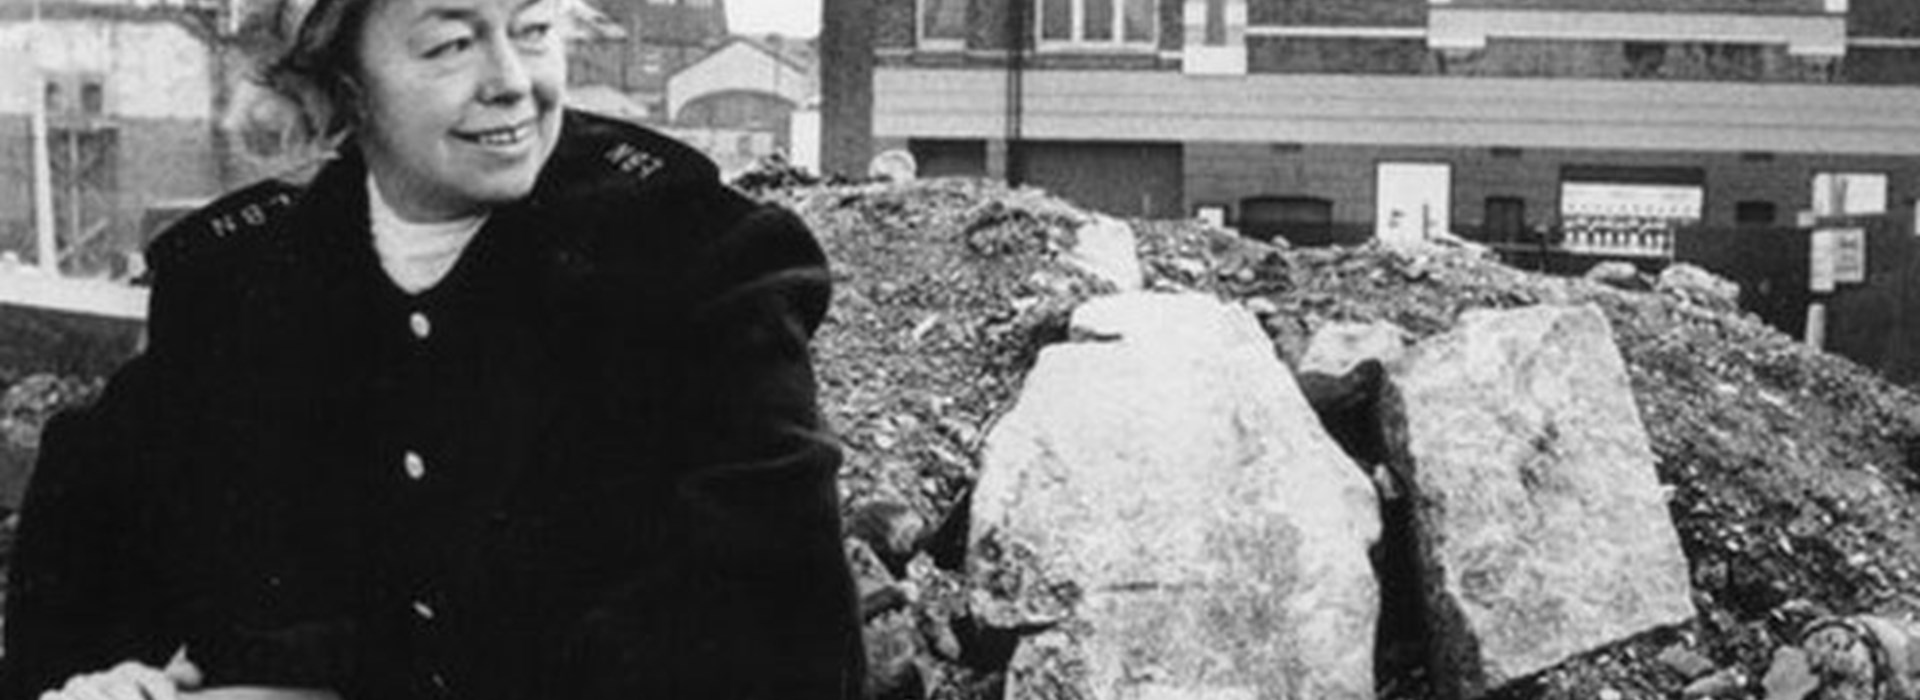 Joan Littlewood, surrounded by rubble following the regeneration of Stratford  during the 1960s.